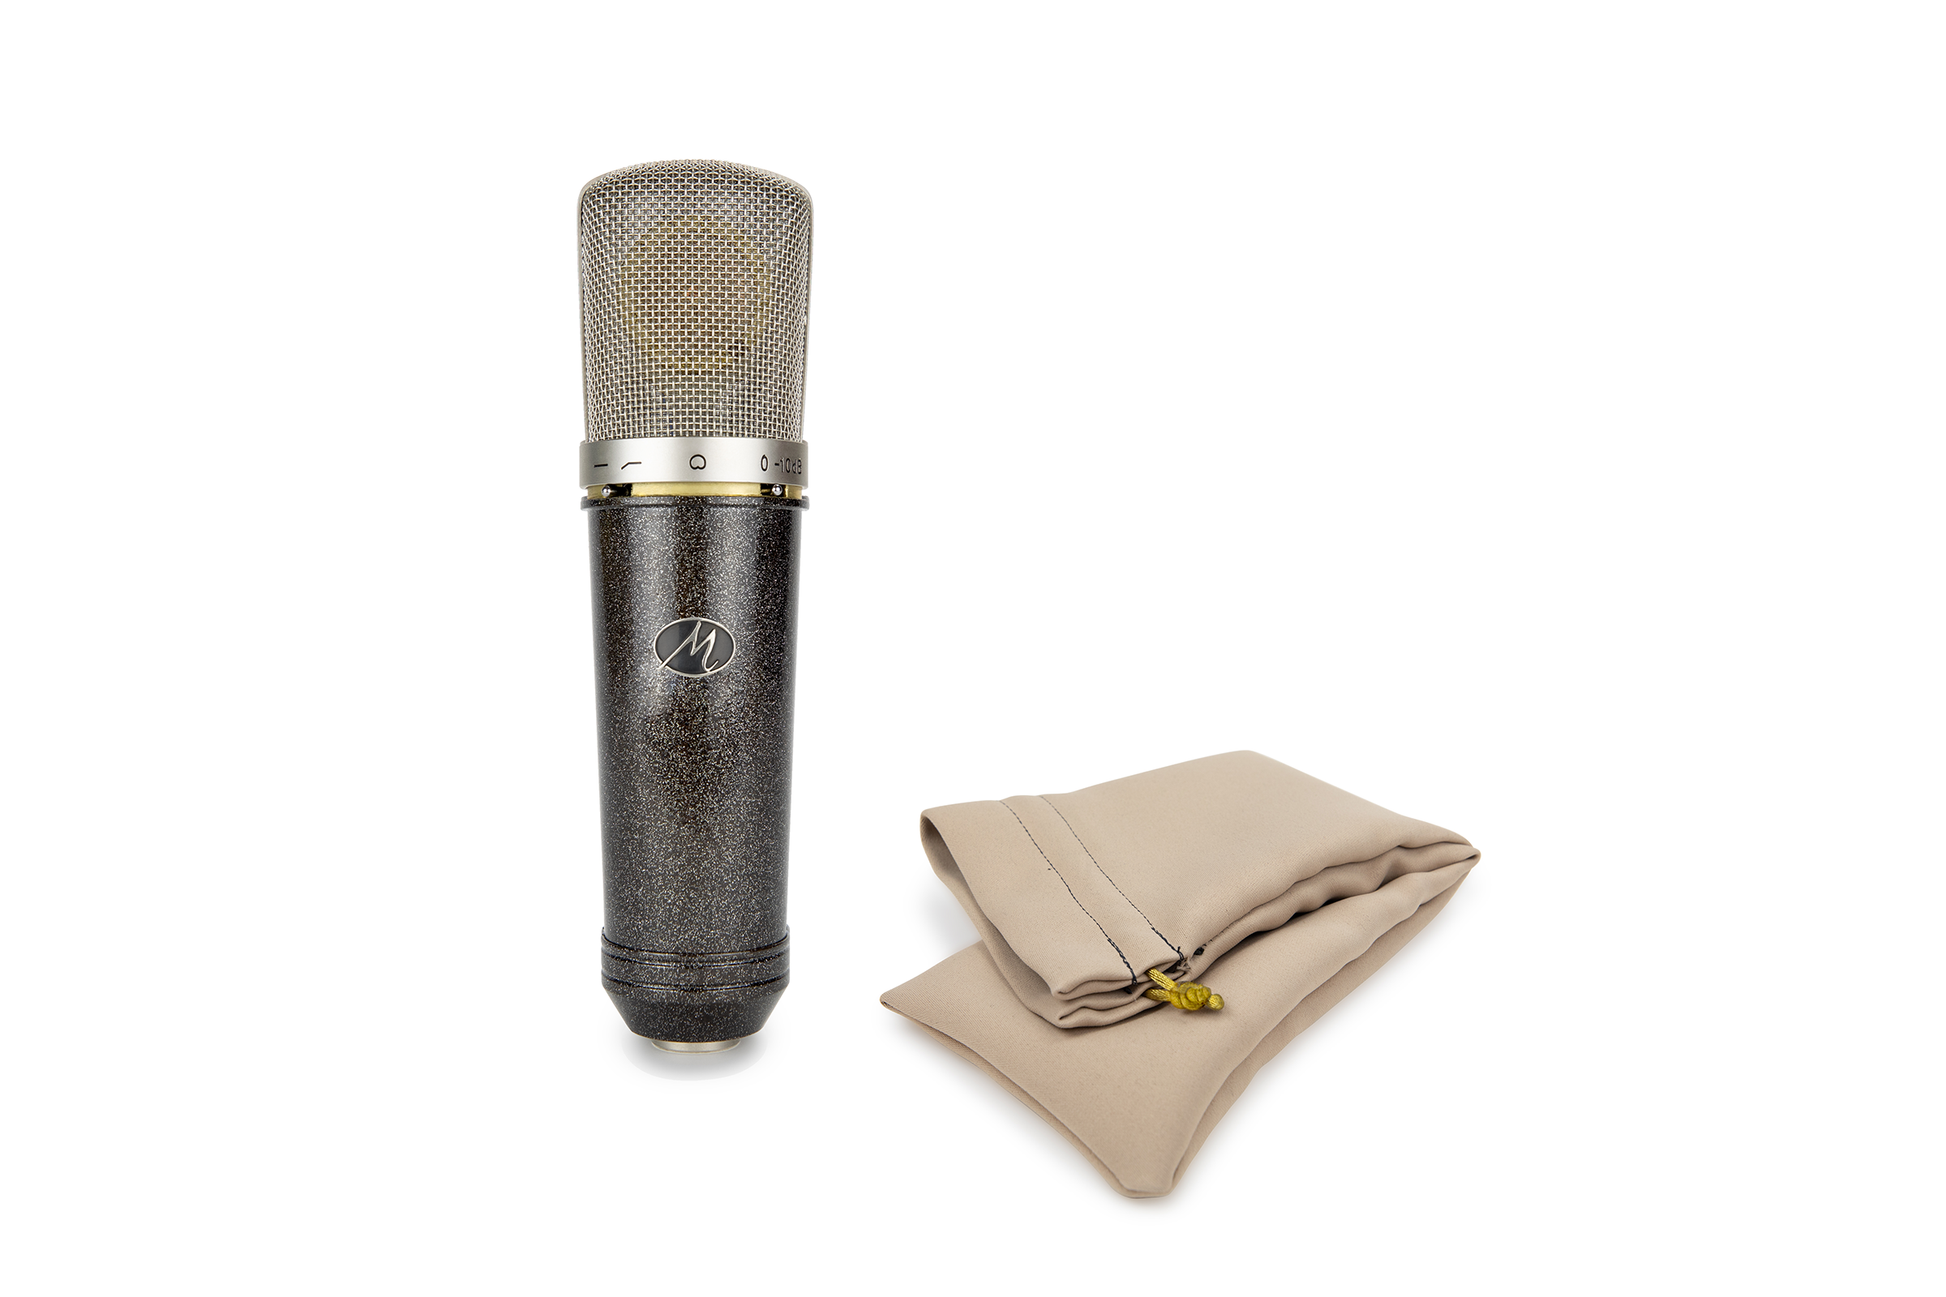 Monheim Microphones FET large diapragm condenser microphone with hand-sewn cover bag.